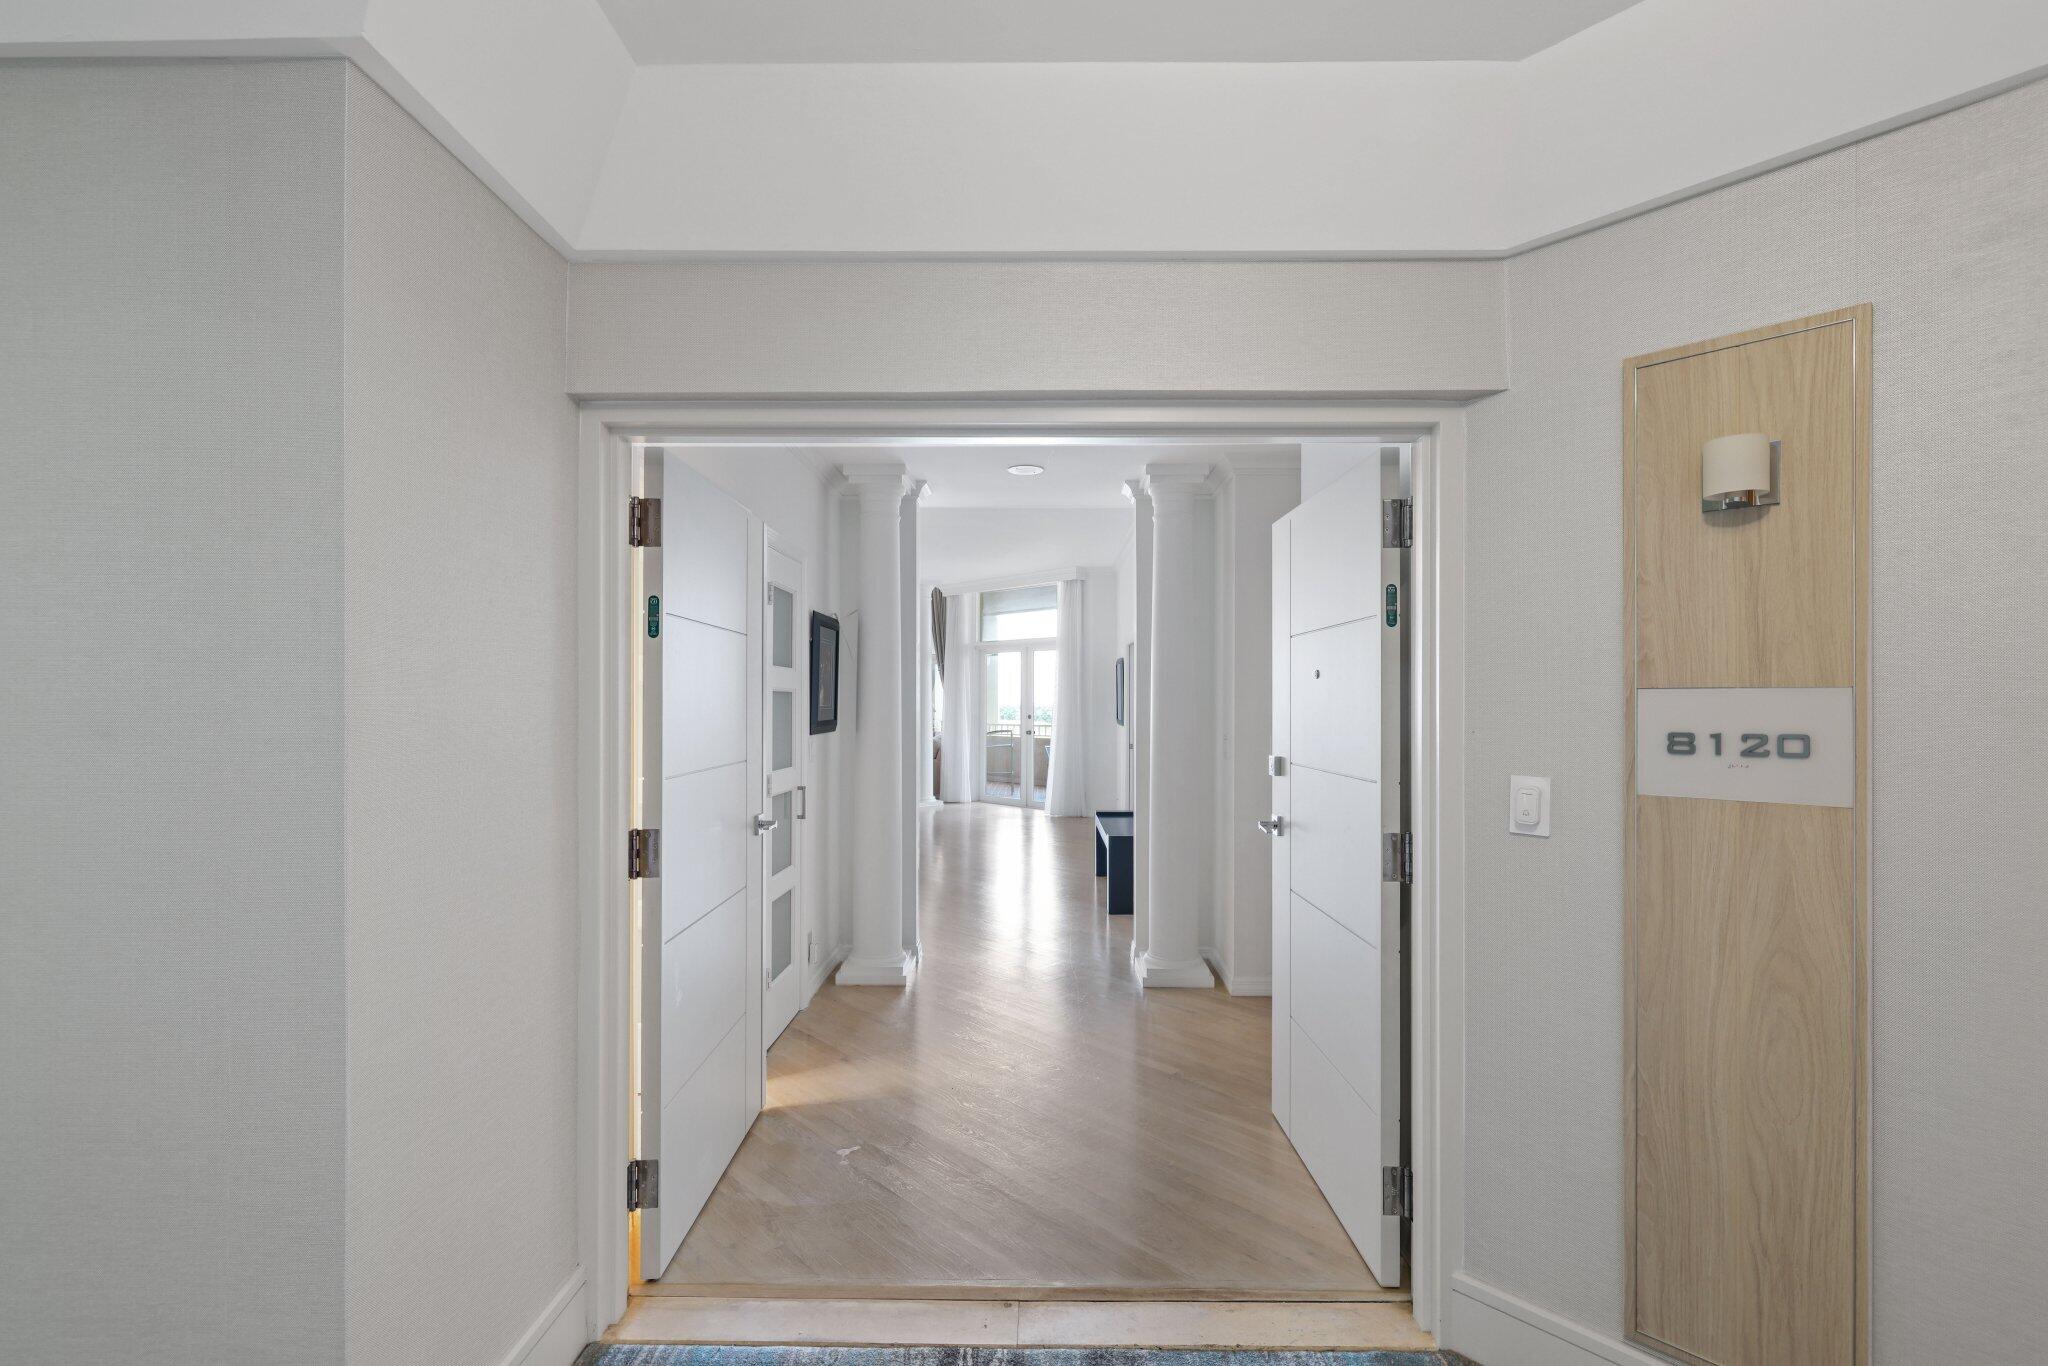 a view of a hallway with wooden floor and a living room